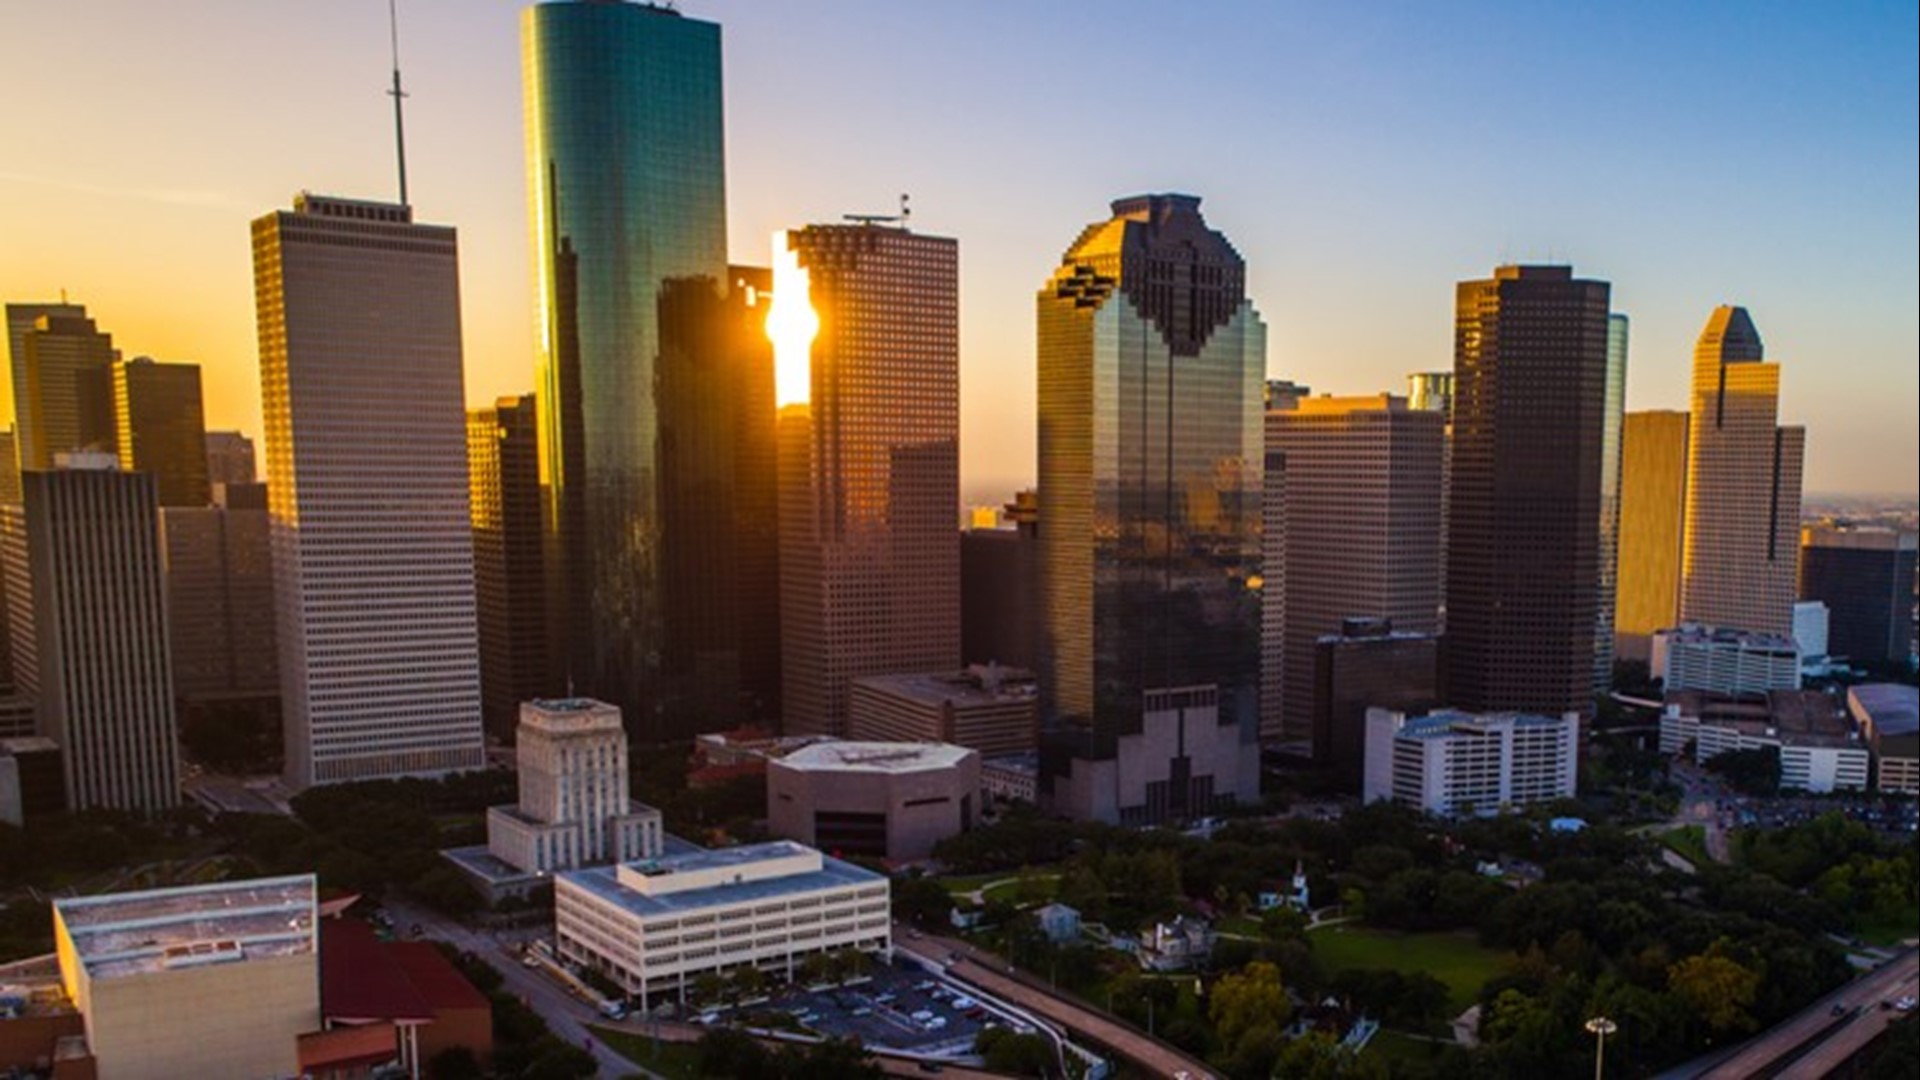 Penske Truck Rental's annual list of the top 10 moving destinations has Houston in the top spot. Texas had four cities in the top 10.